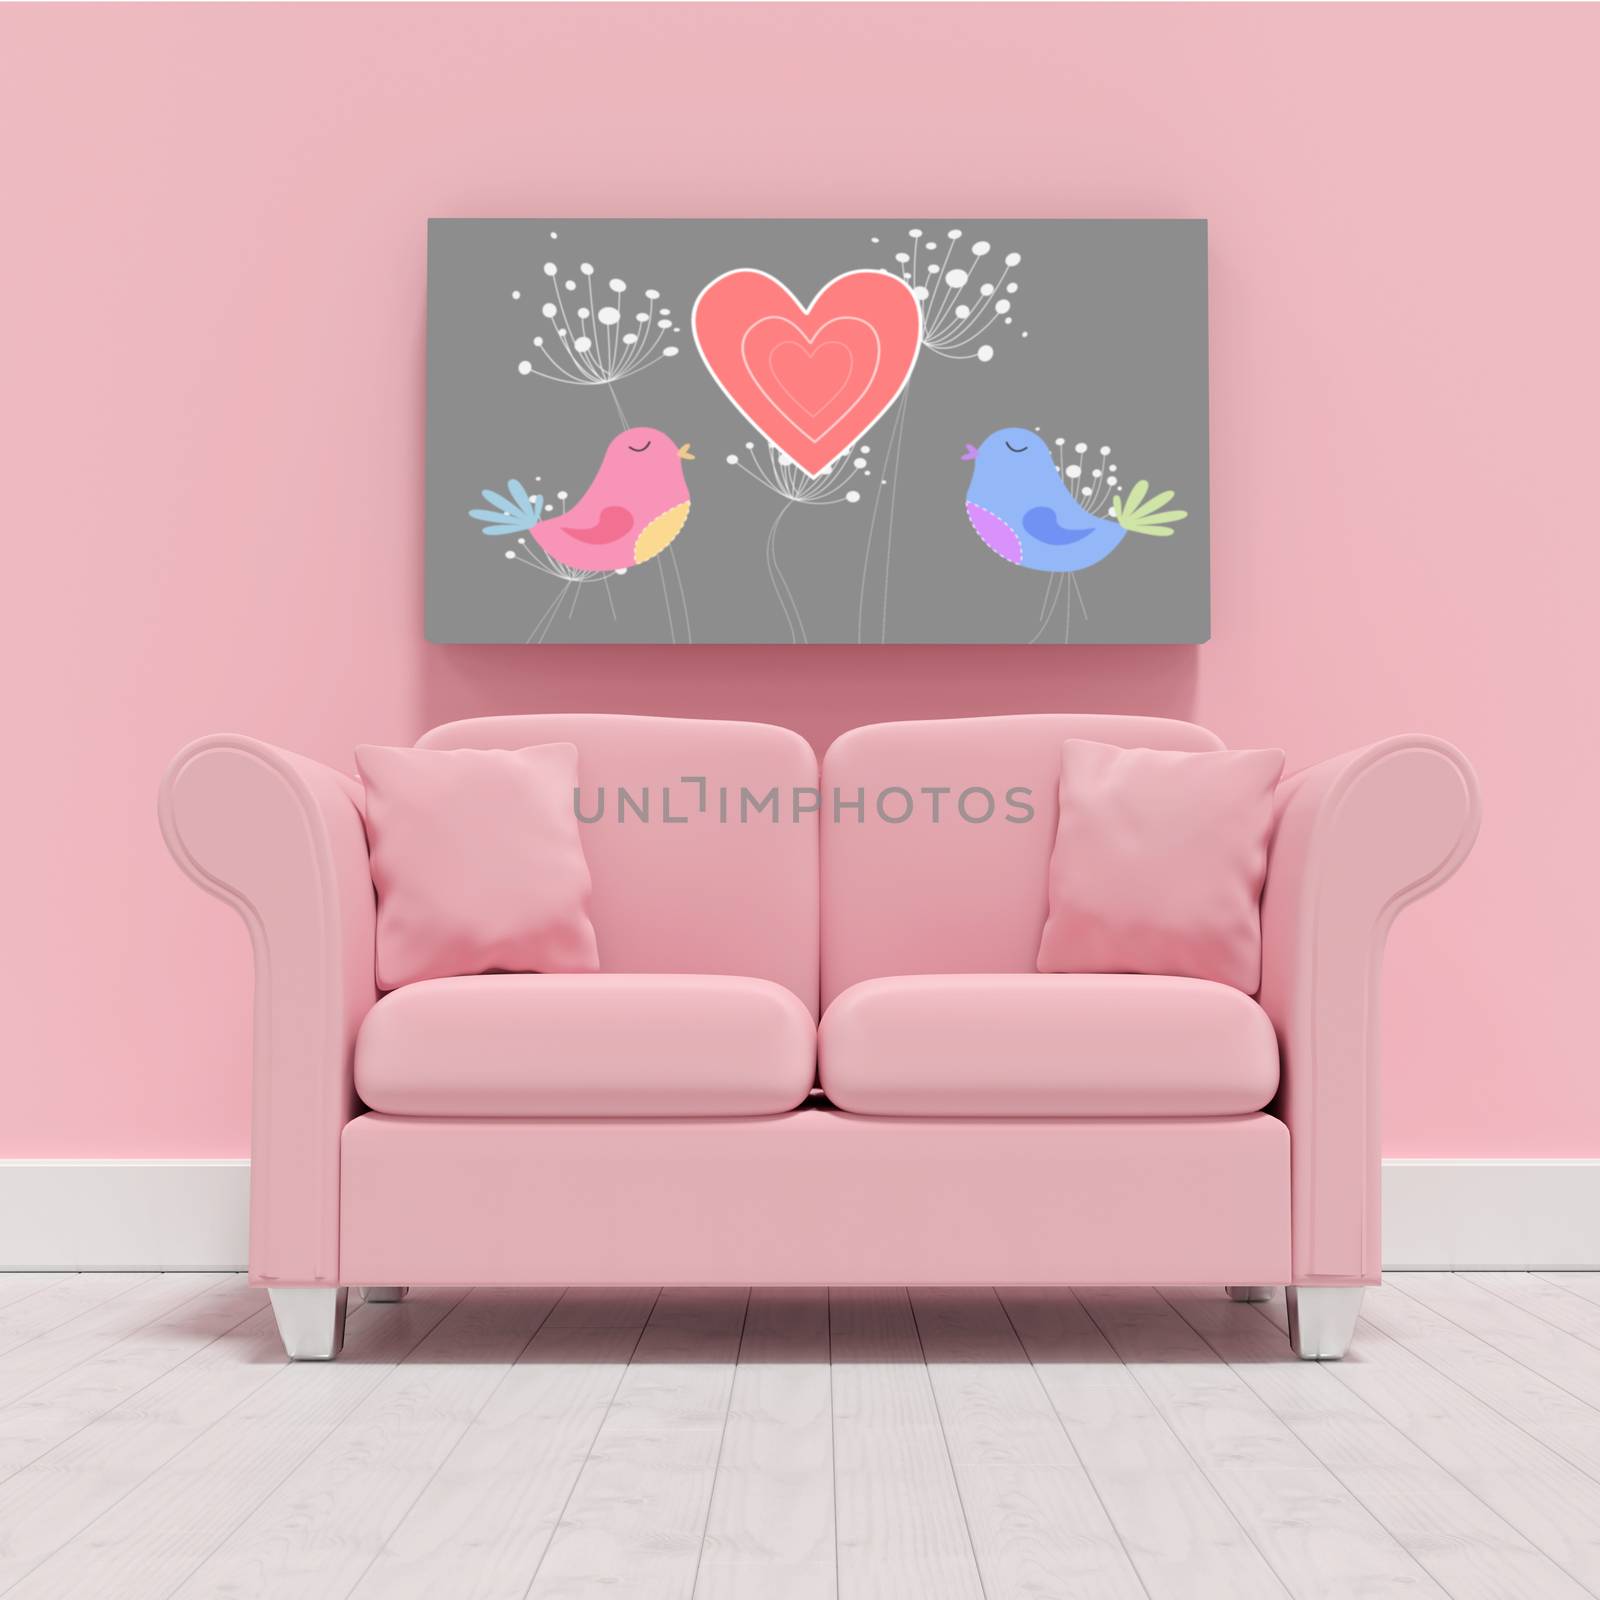 Composite image of pink couch against blank picture frame  by Wavebreakmedia